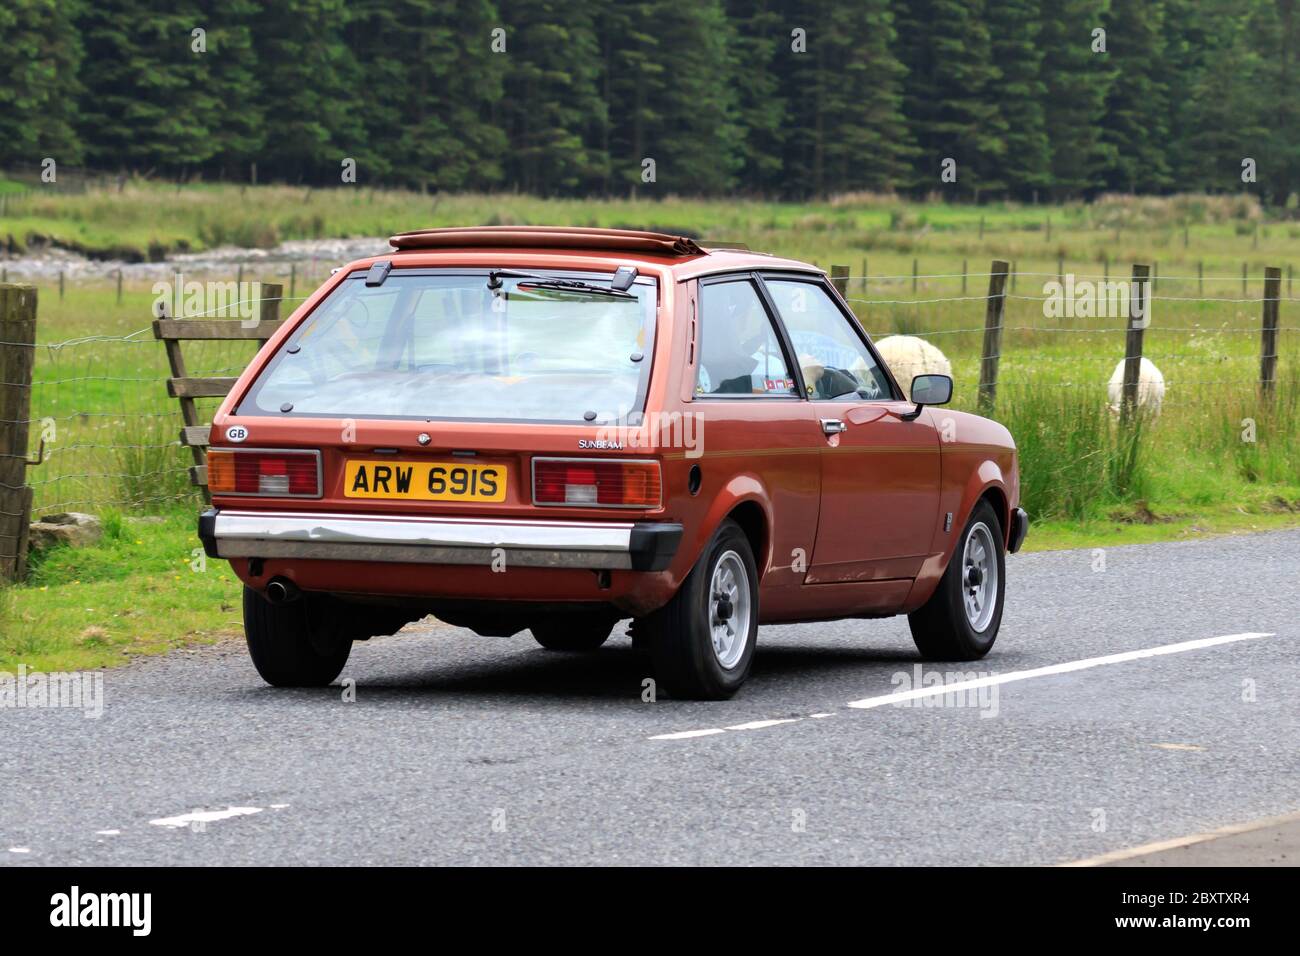 MOFFAT, SCOTLAND - JUNE 29, 2019: 1977 Chrysler Sunbeam car in a classic car rally en route towards the town of Moffat, Dumfries and Galloway Stock Photo